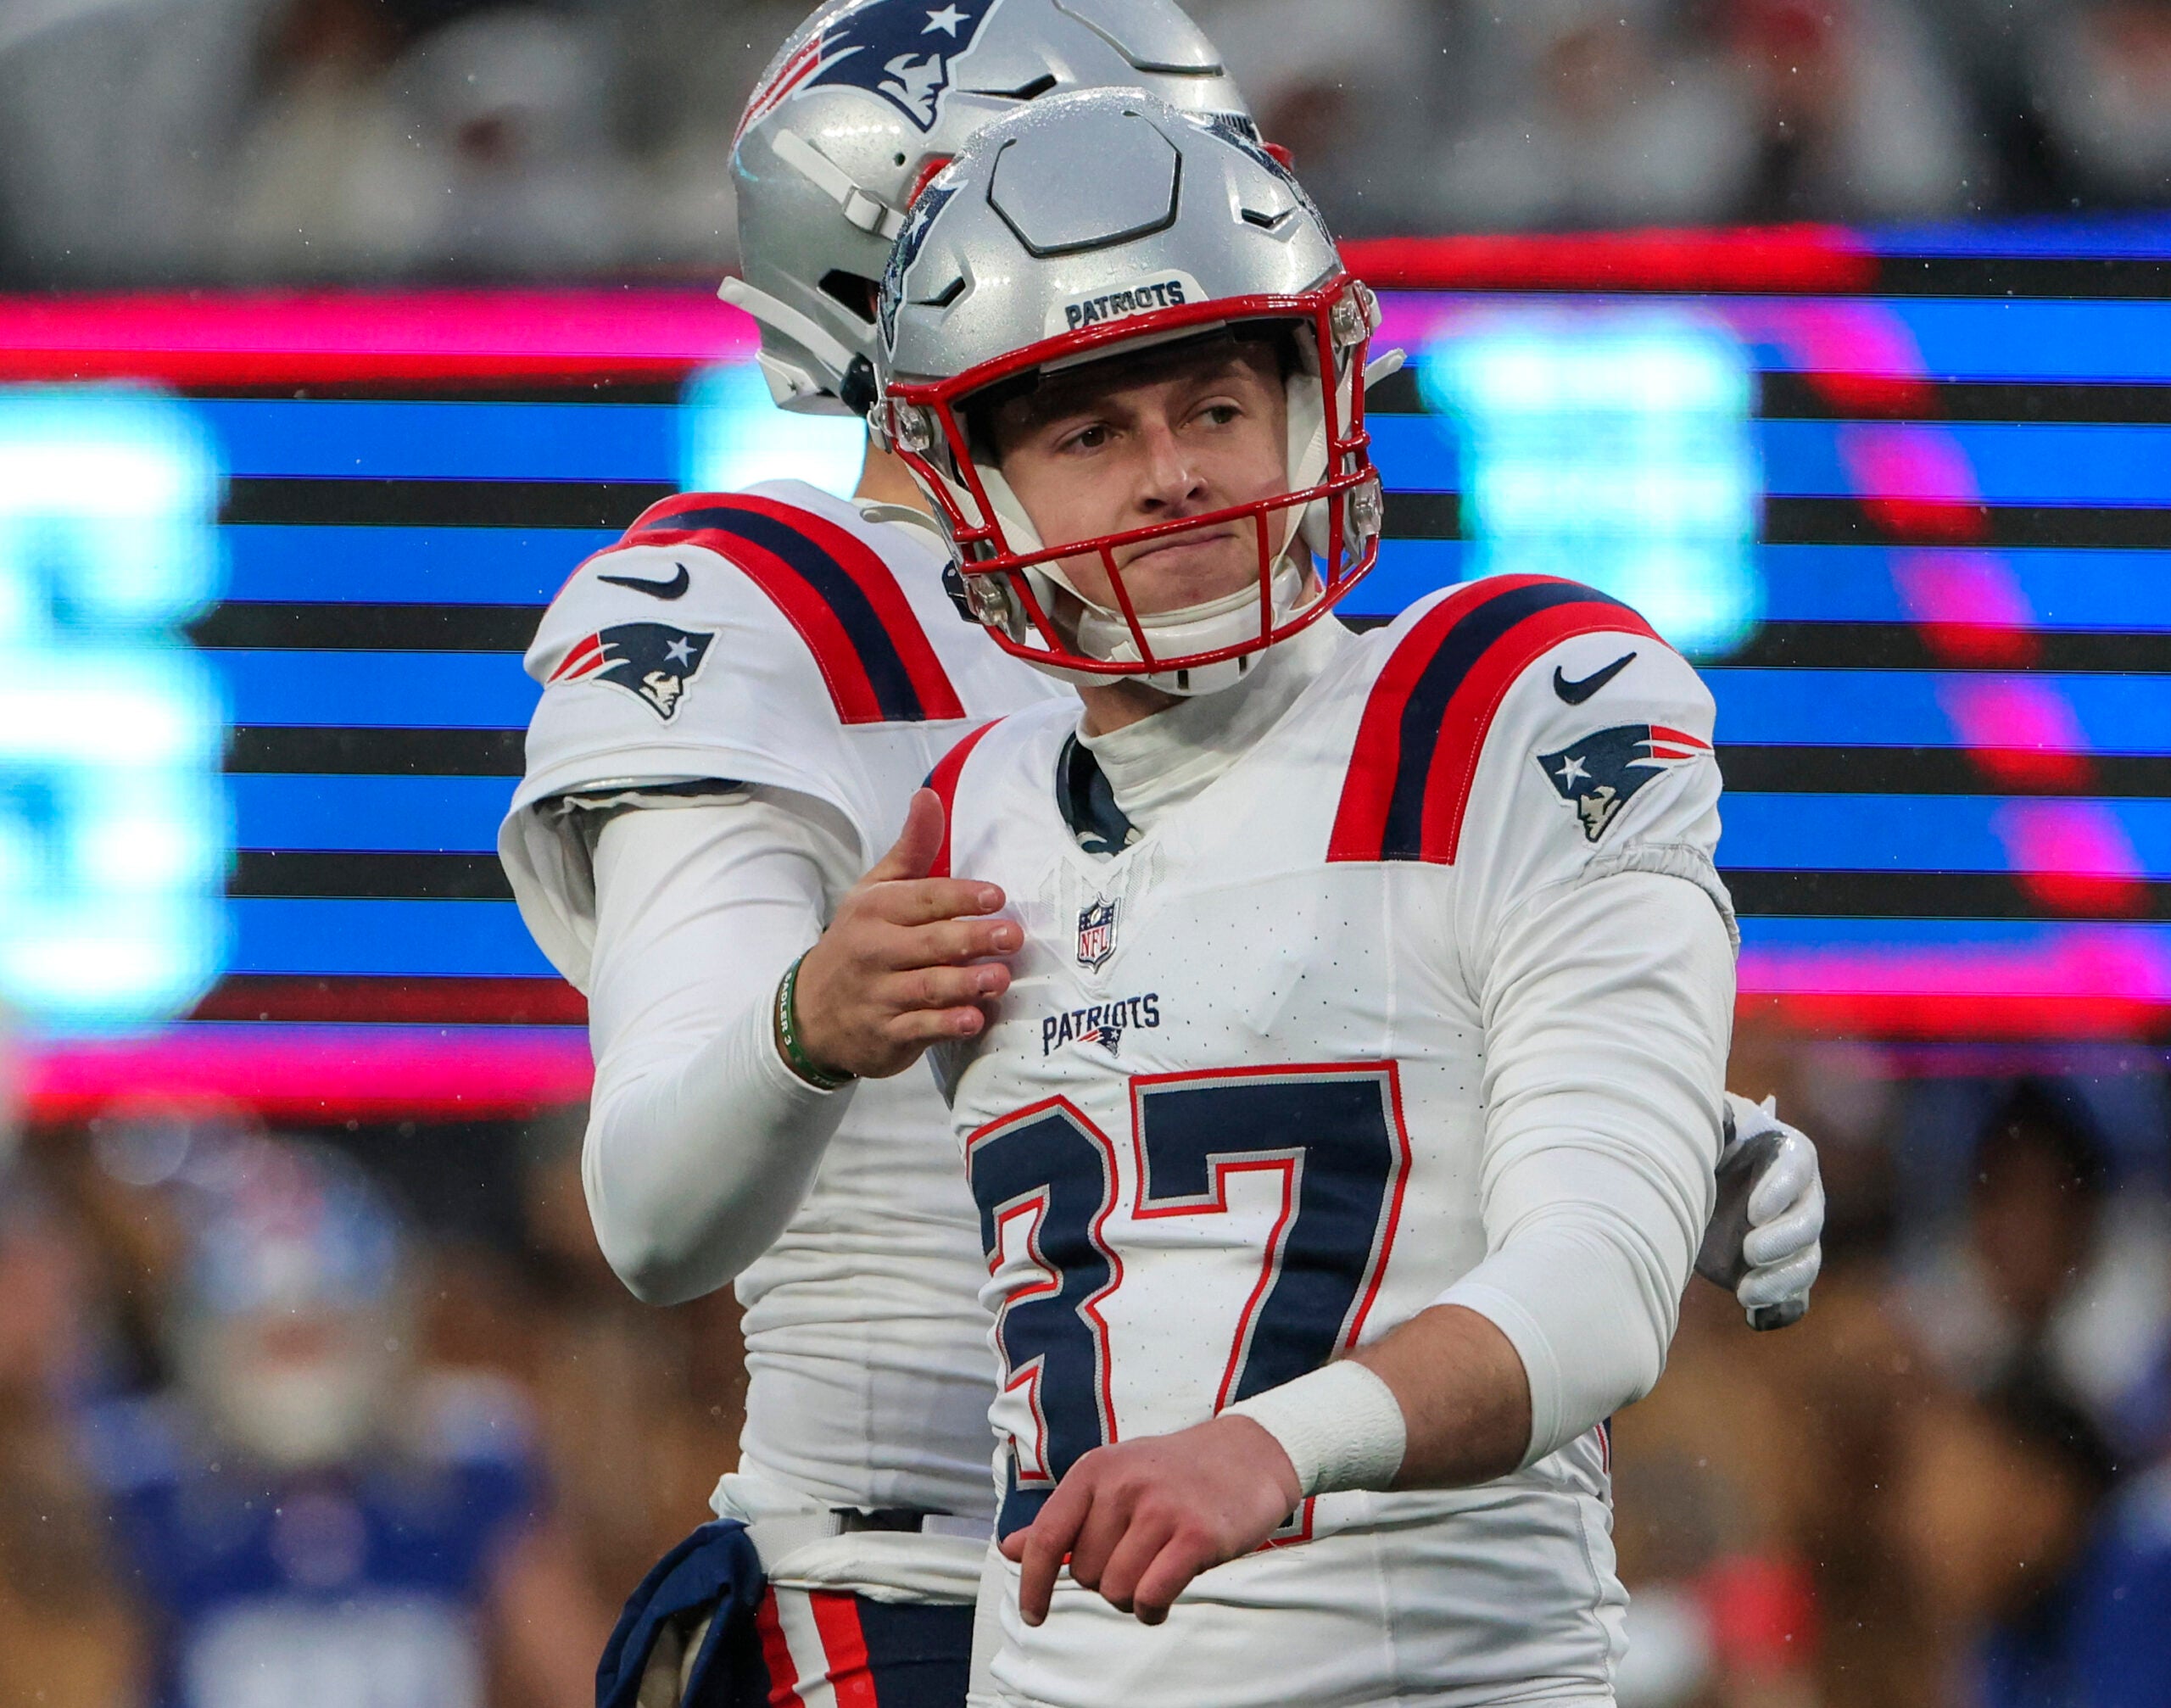 New England Patriots kicker Chad Ryland reacting after missing a game tying 35-yard field goal against the New York Giants during fourth quarter NFL action at MetLife Stadium.